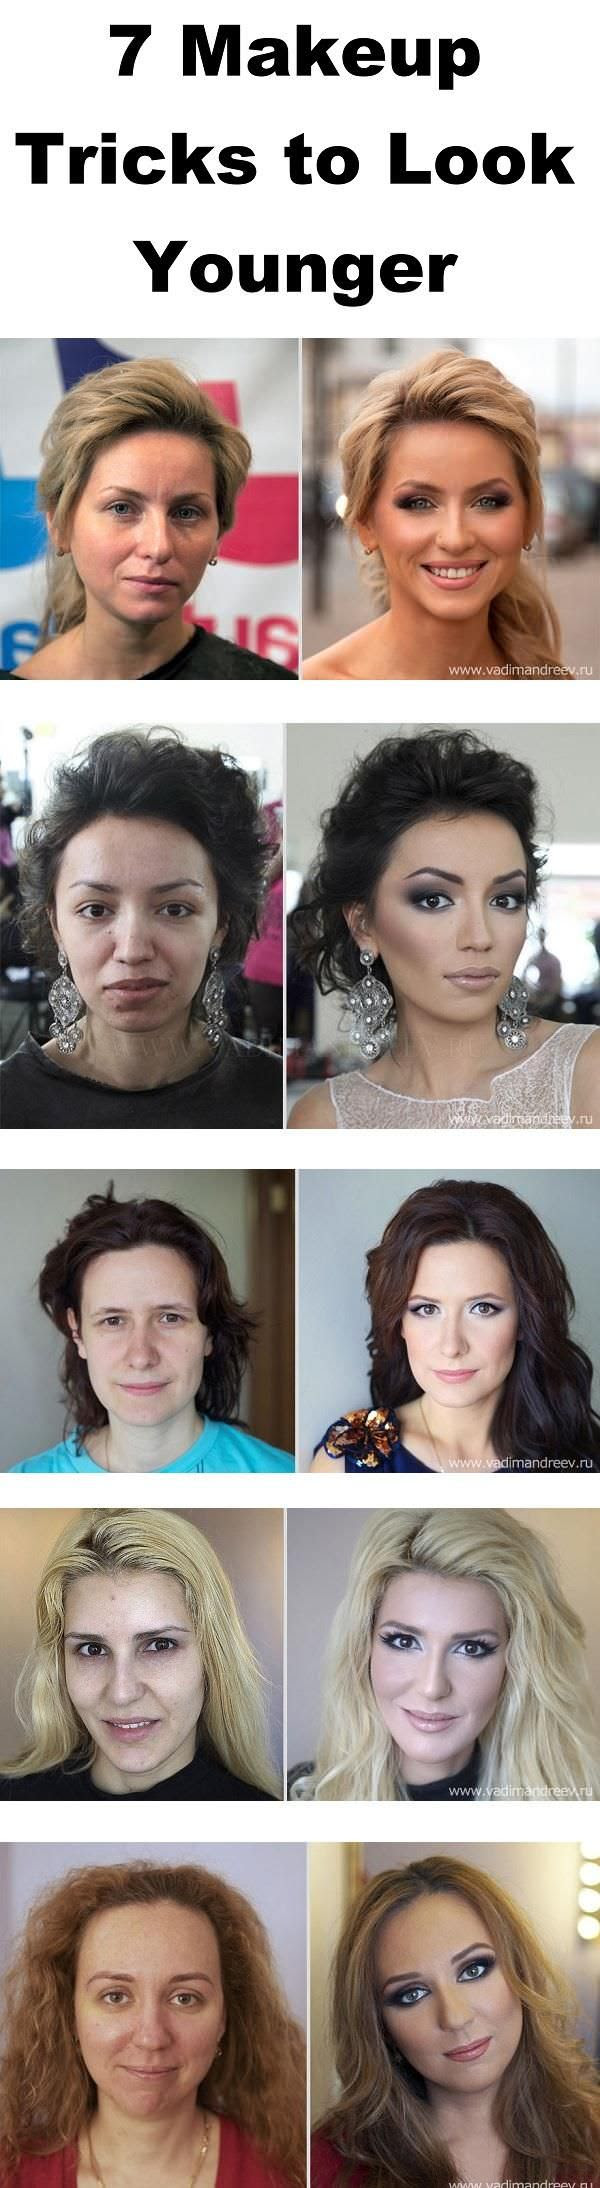 Makeup tips to make u look younger